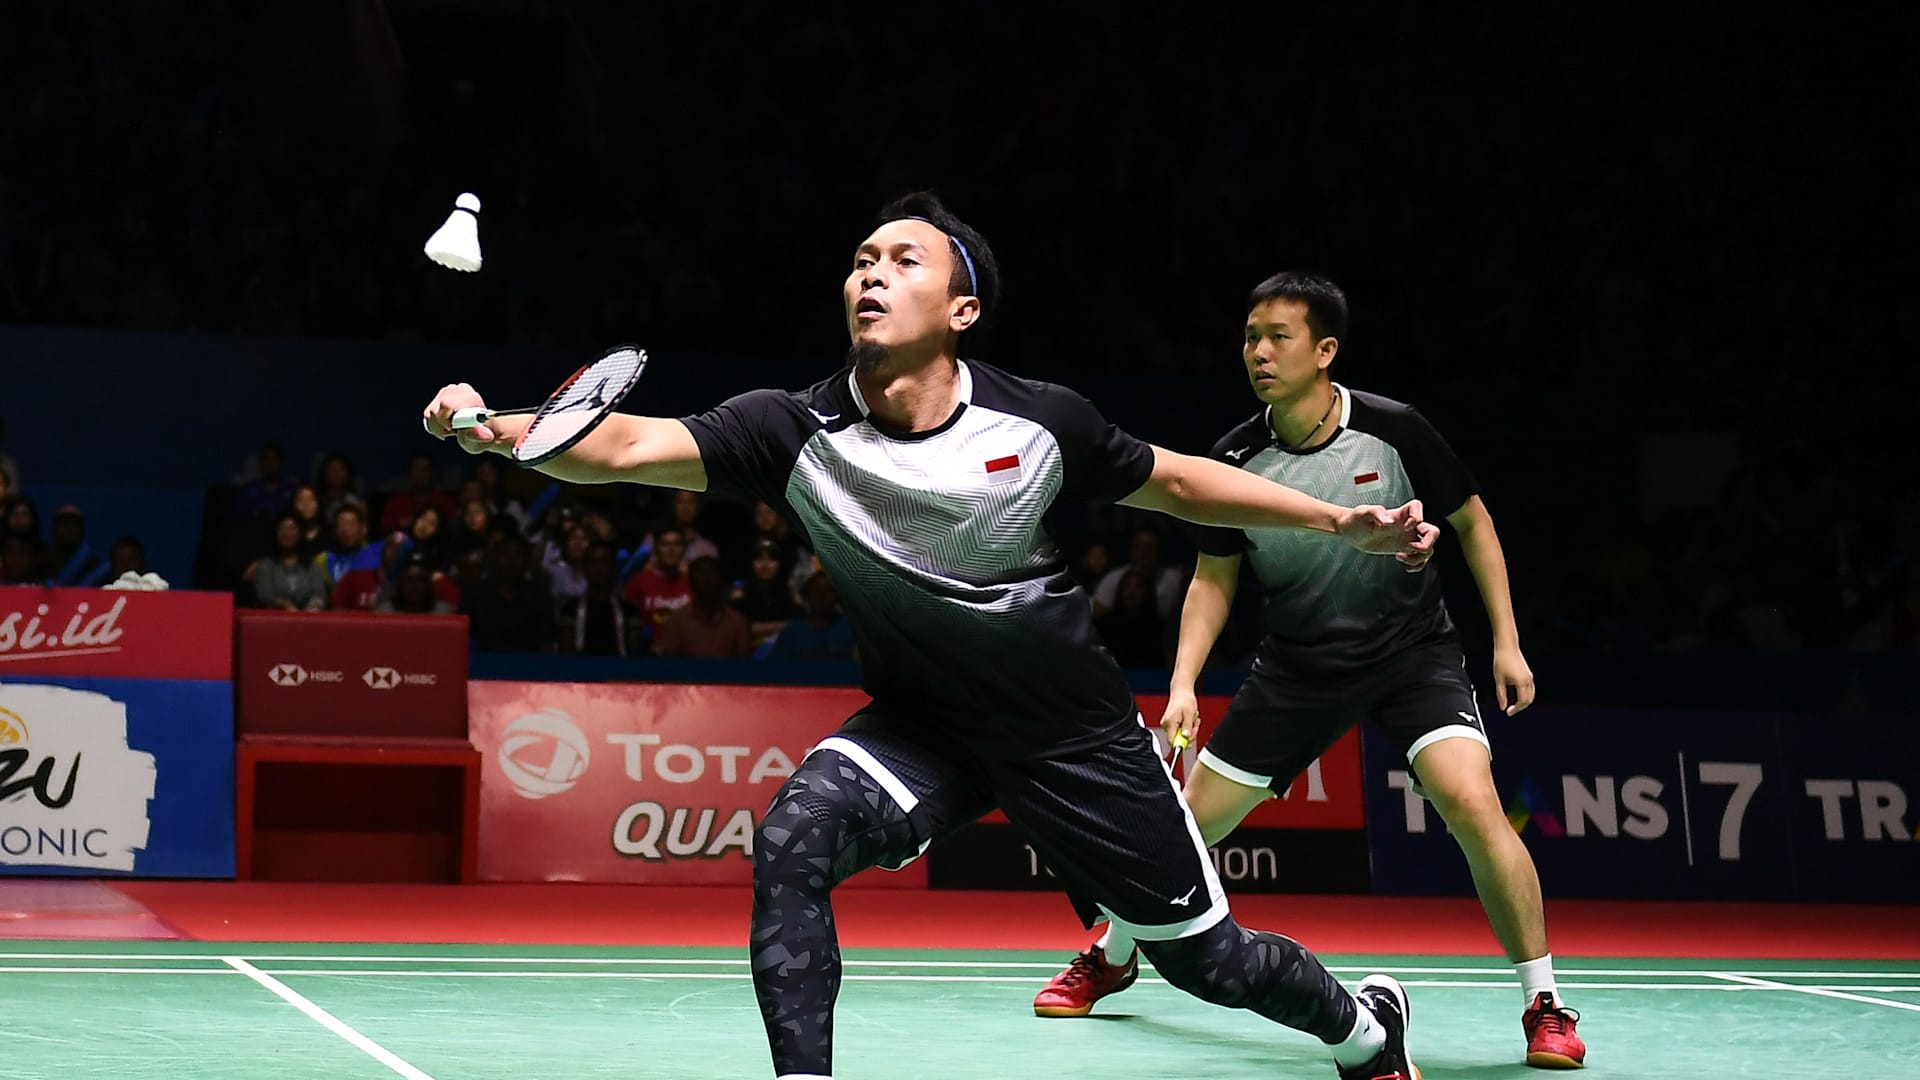 Indonesia Looking To Reclaim A Title At Badminton World Championships 2019